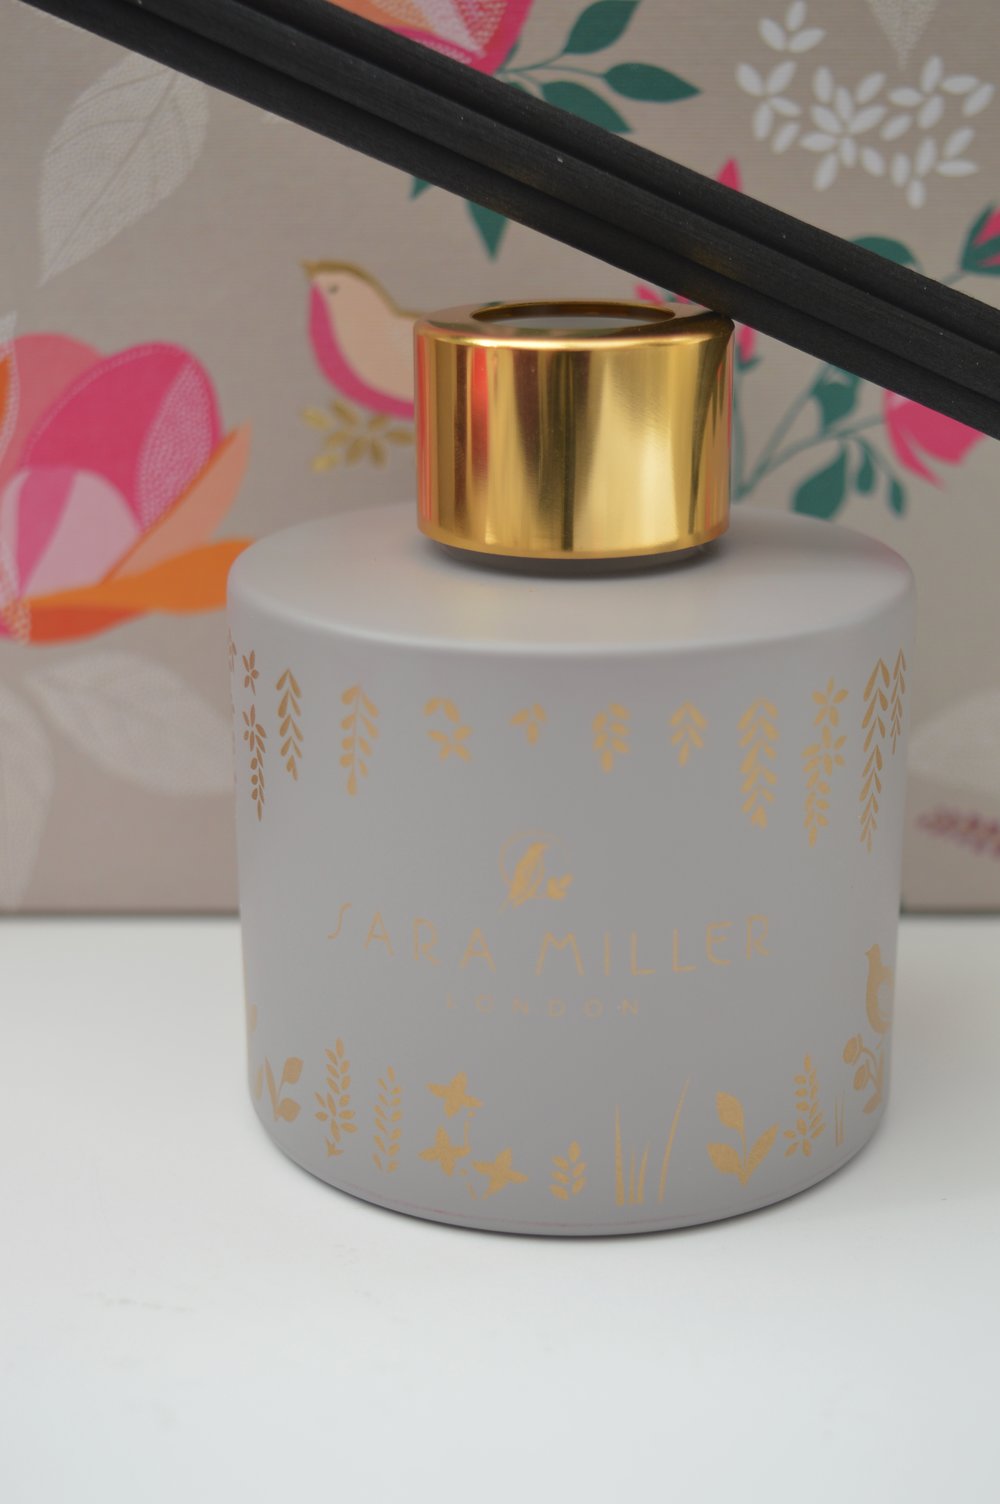 3 Amazing Reason Sara Miller Candles Are A Celebrity Favourite 8